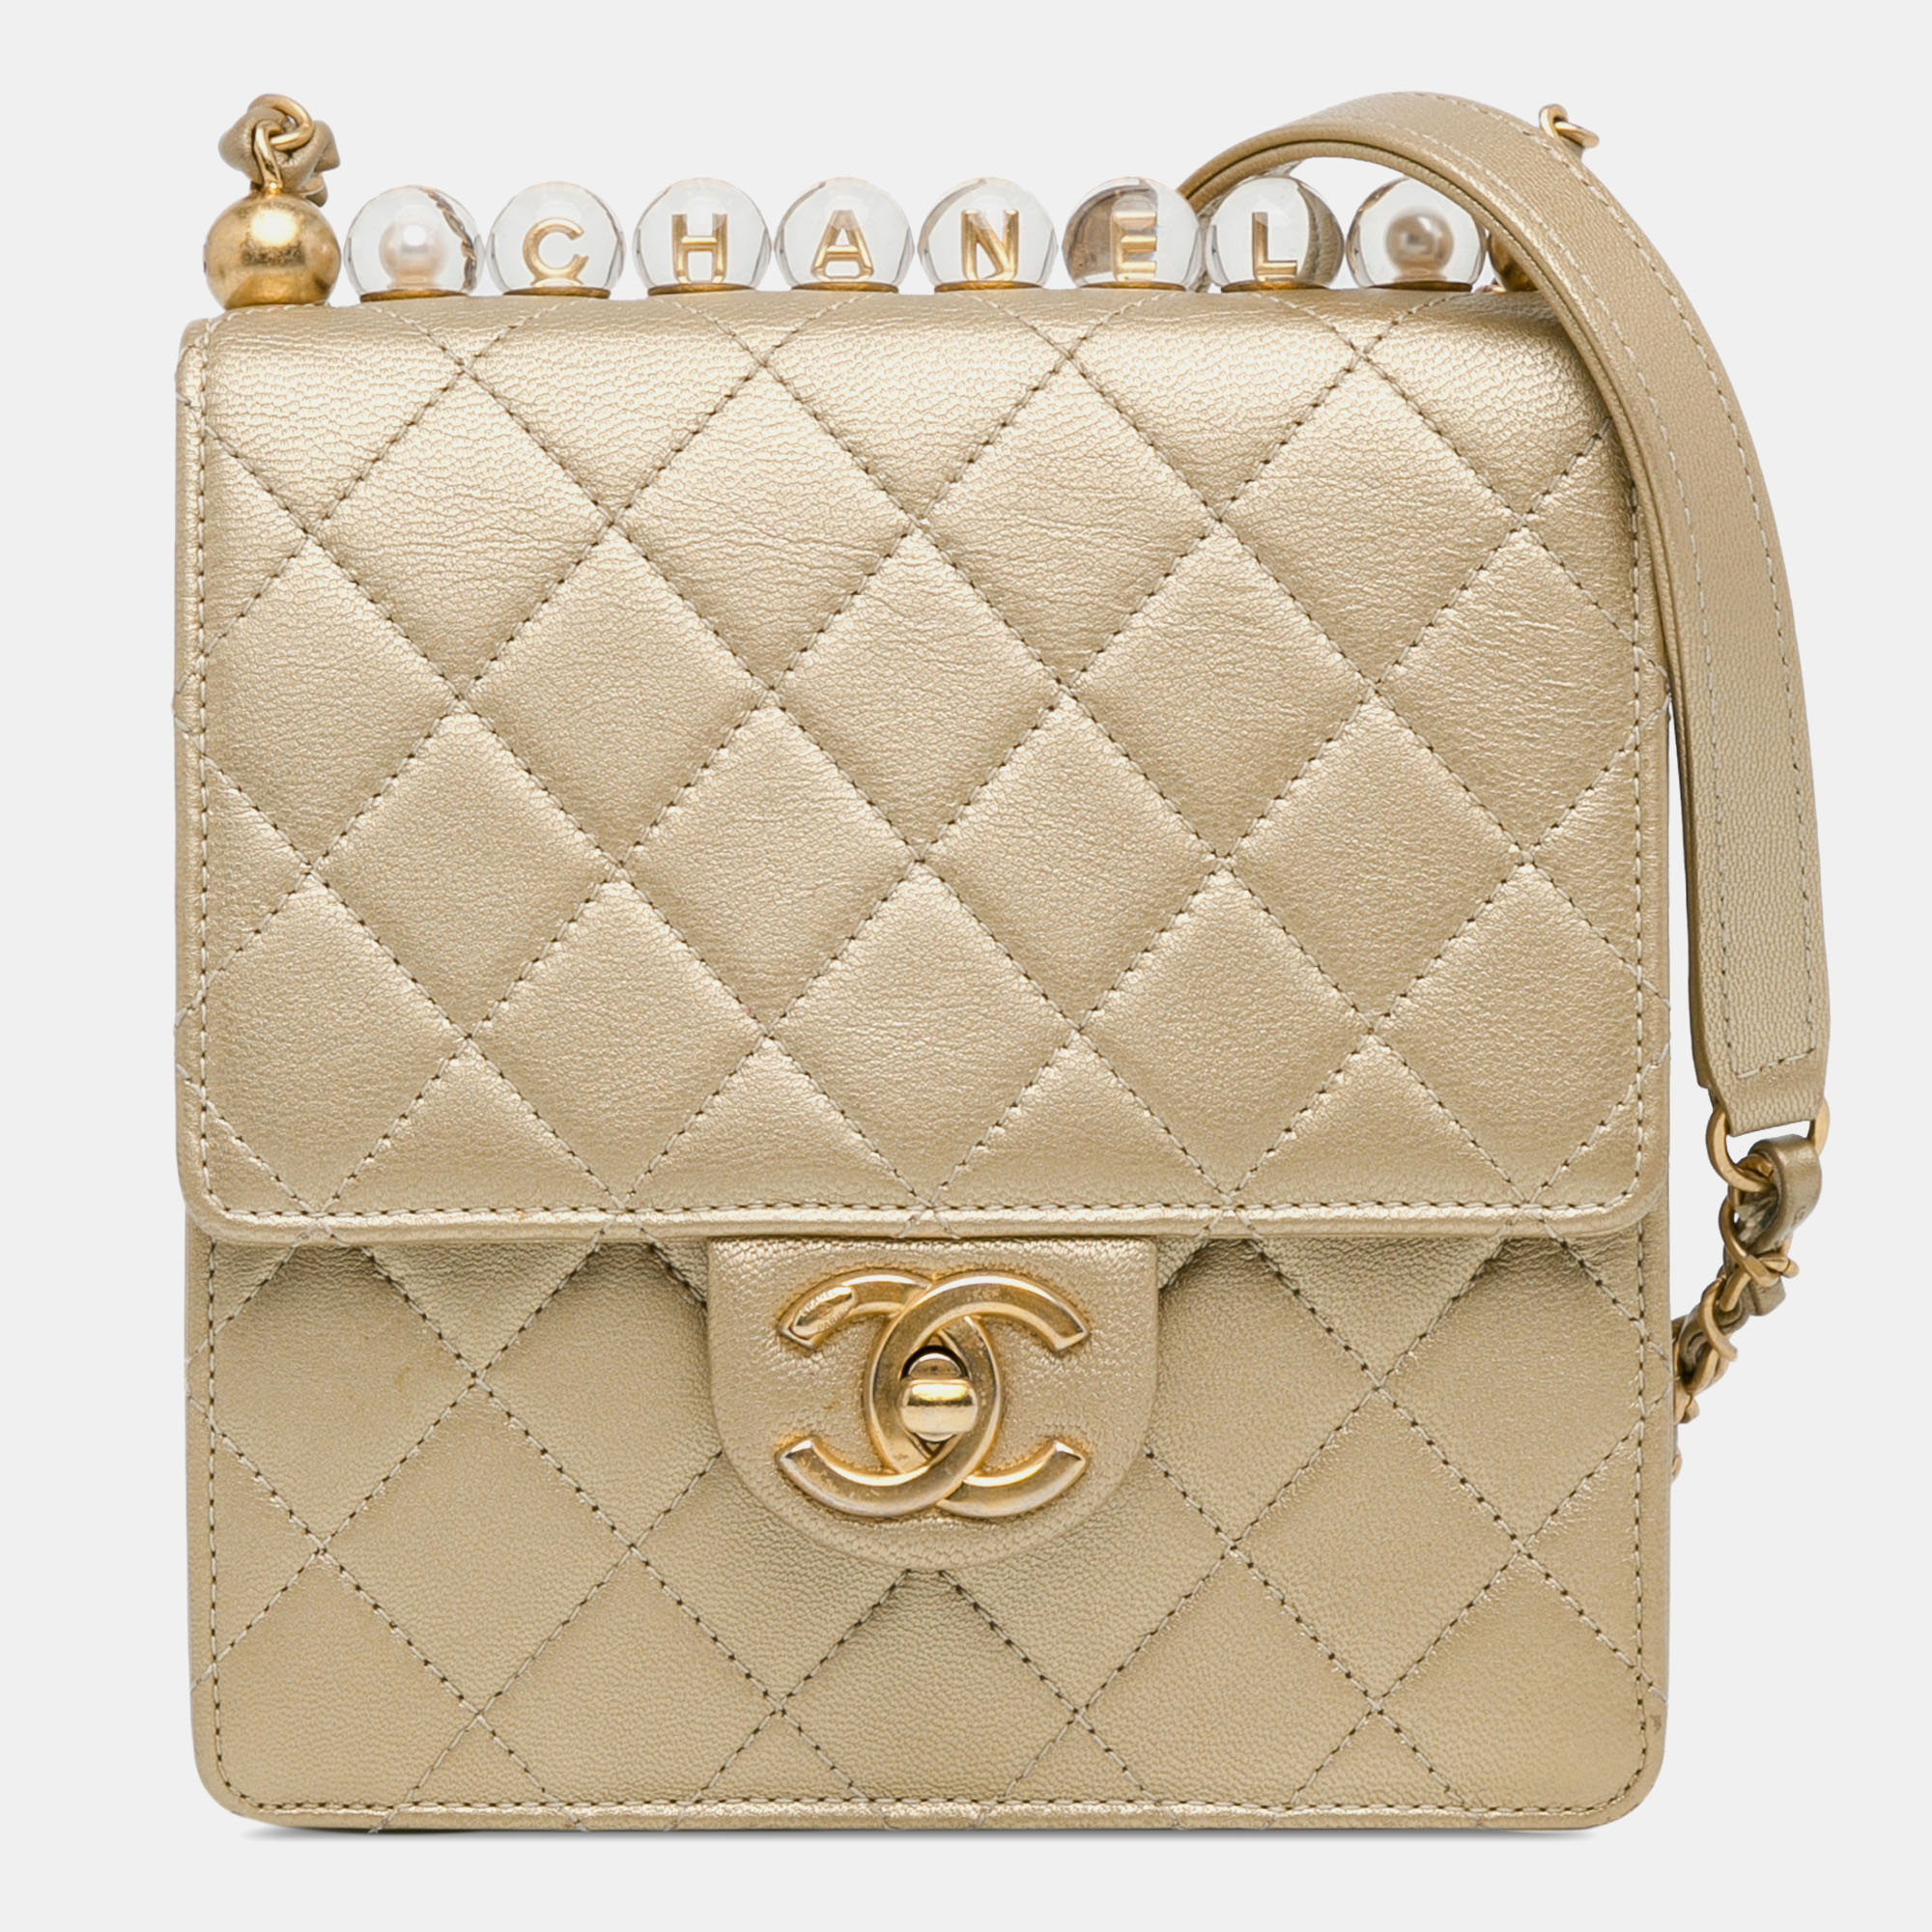 Chanel small lambskin chic pearls flap bag